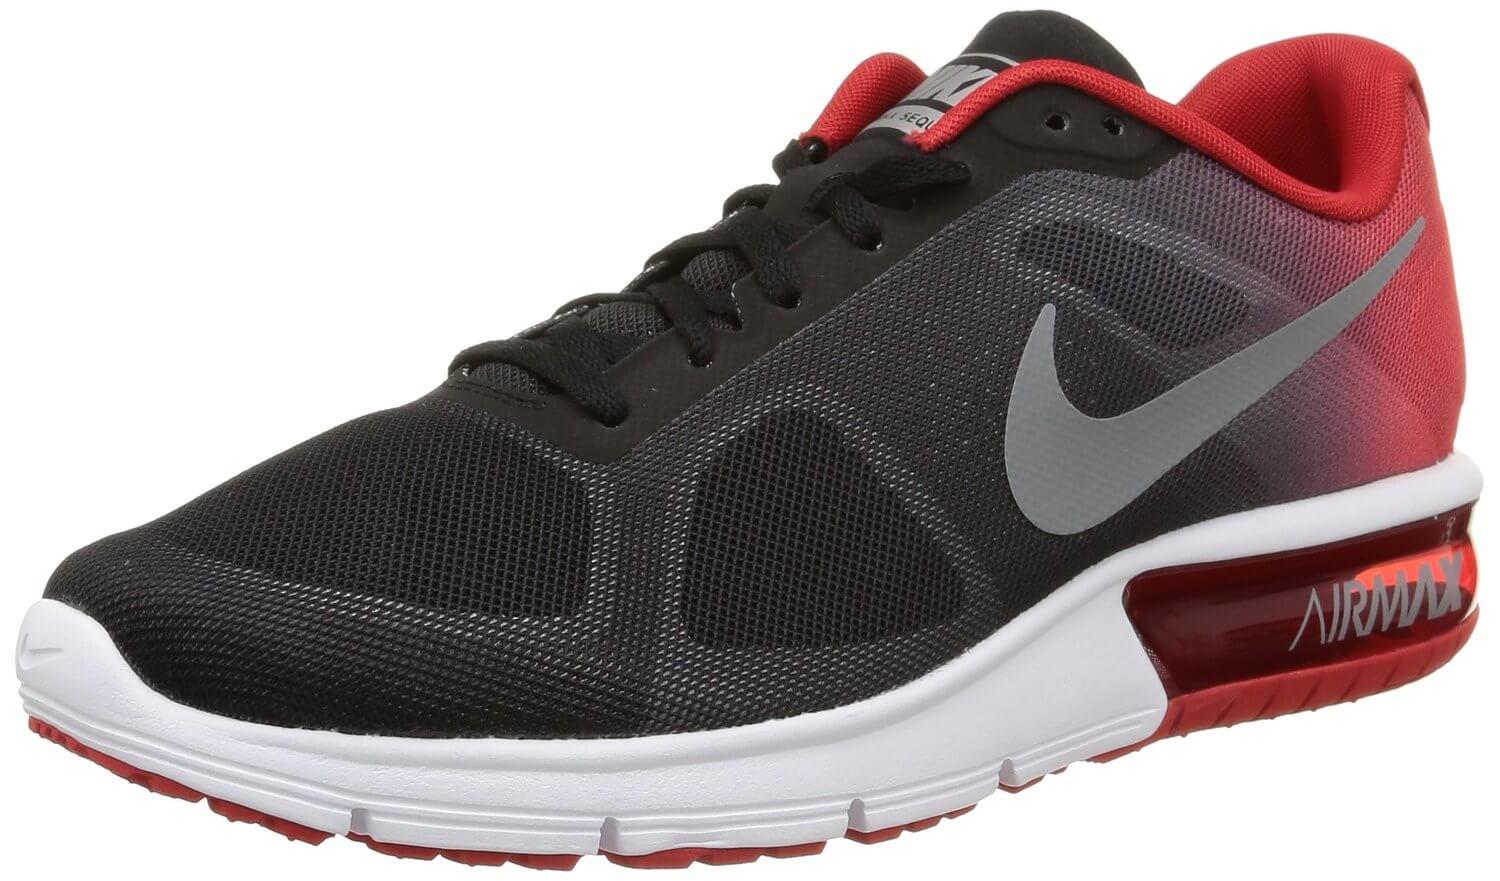 The Nike Air Max Sequent is a stylish and functional addition to the Nike product line.